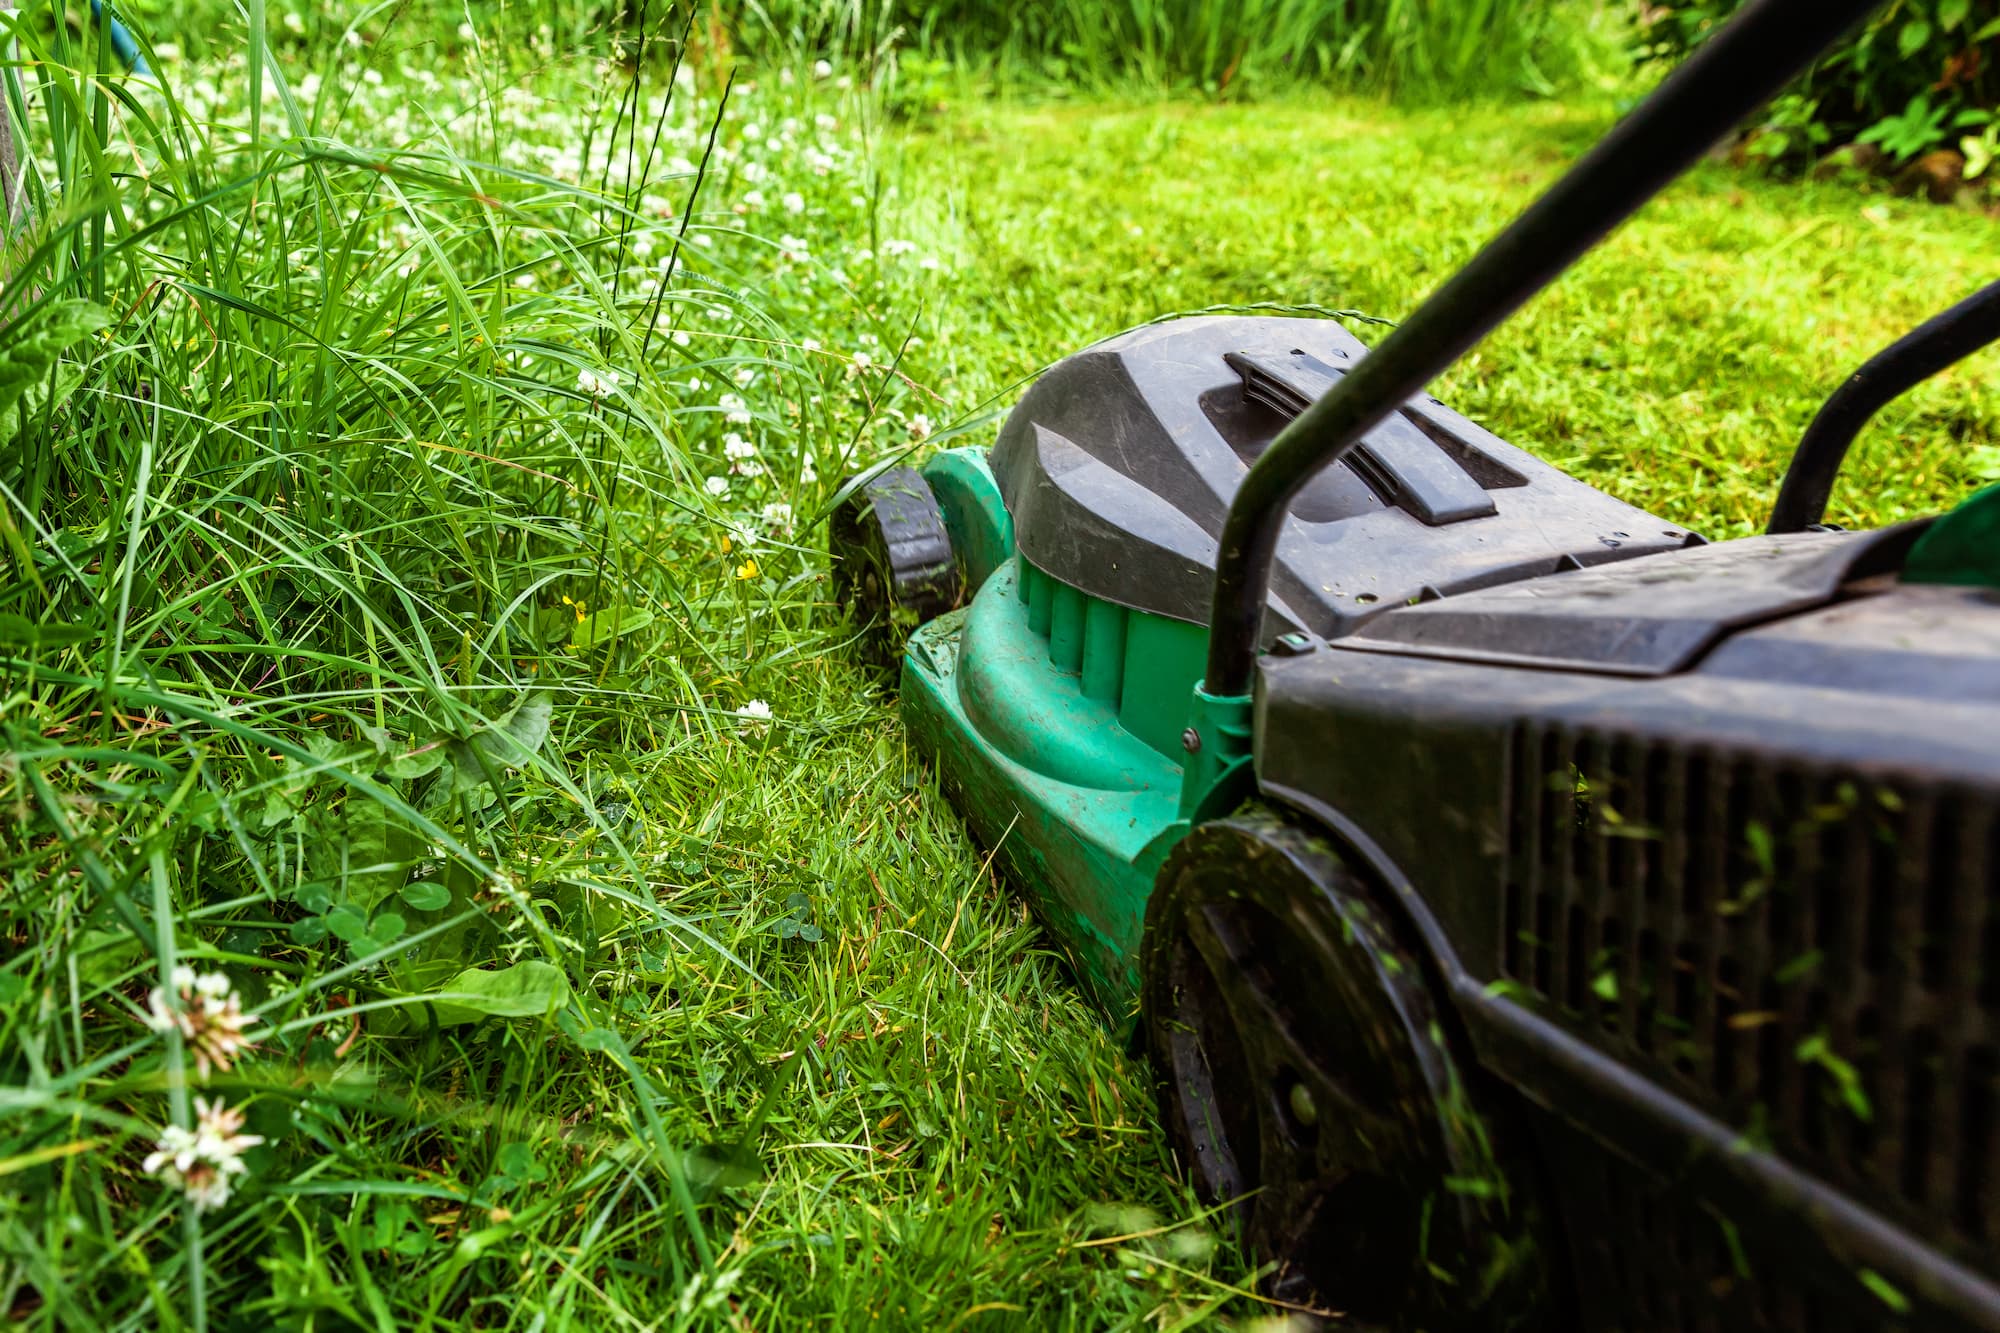 Need an excuse not to mow? No Mow May!